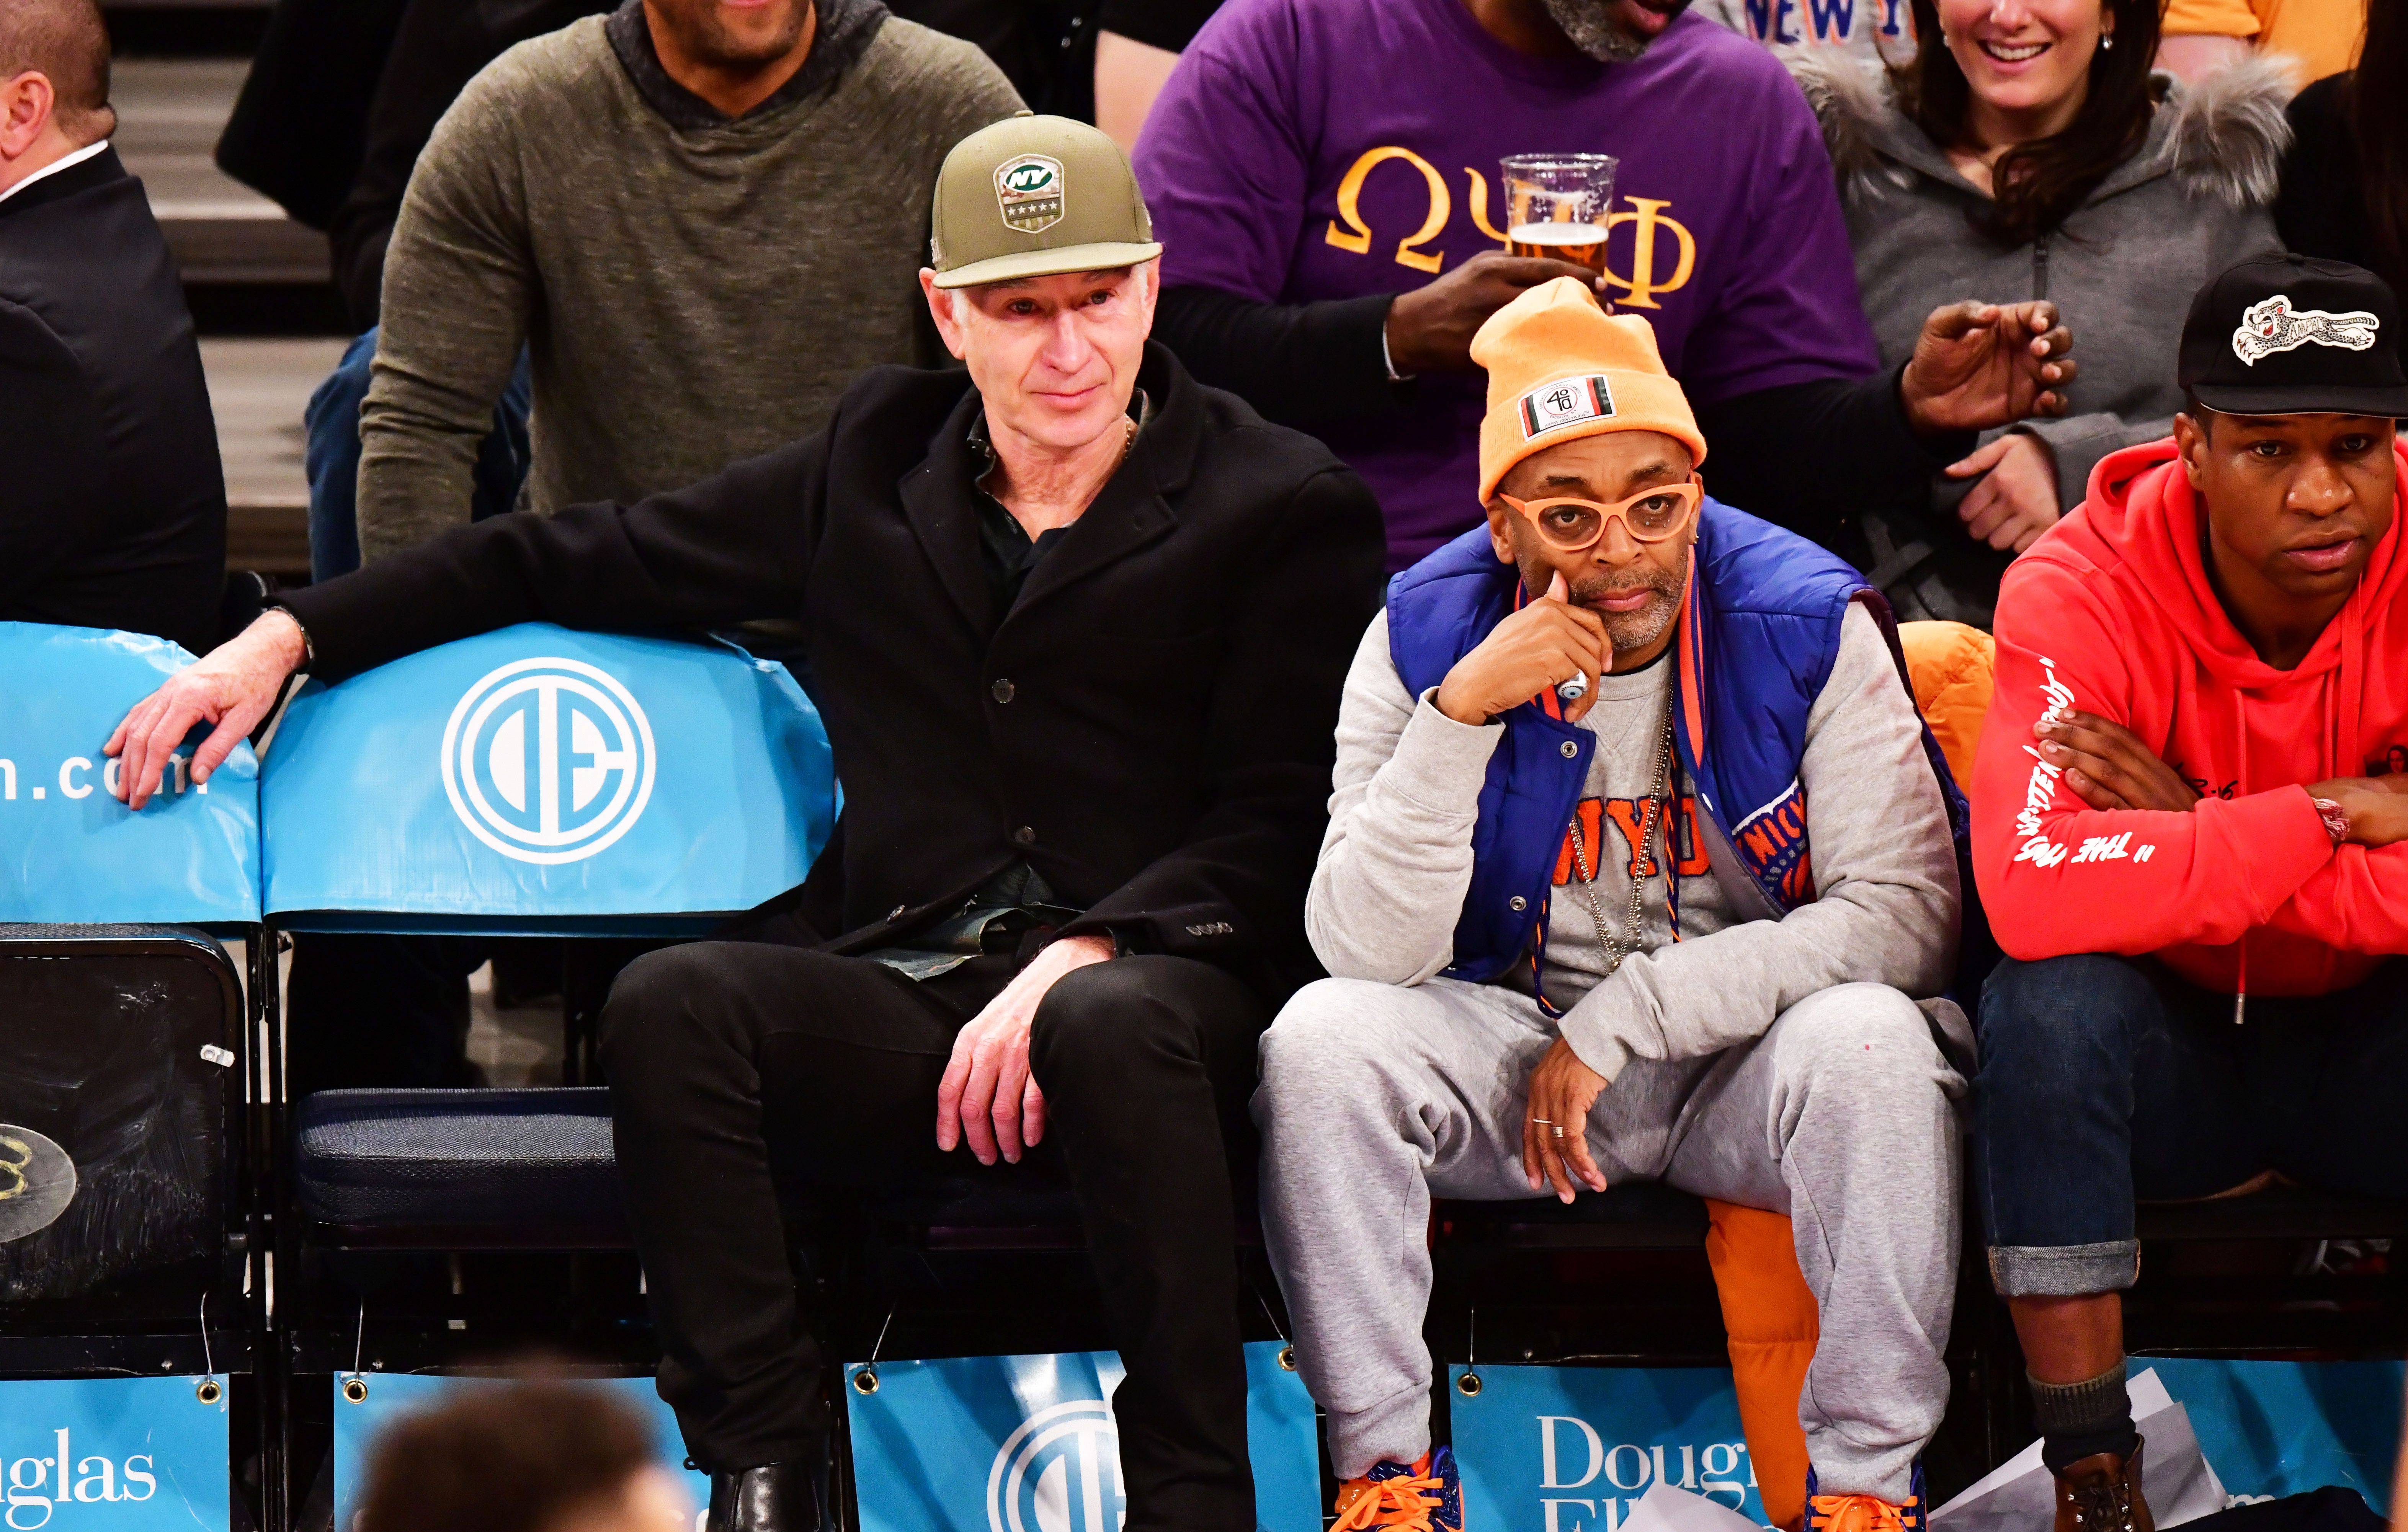 Knicks fan Spike Lee is a massive traitor for rooting for Nets vs